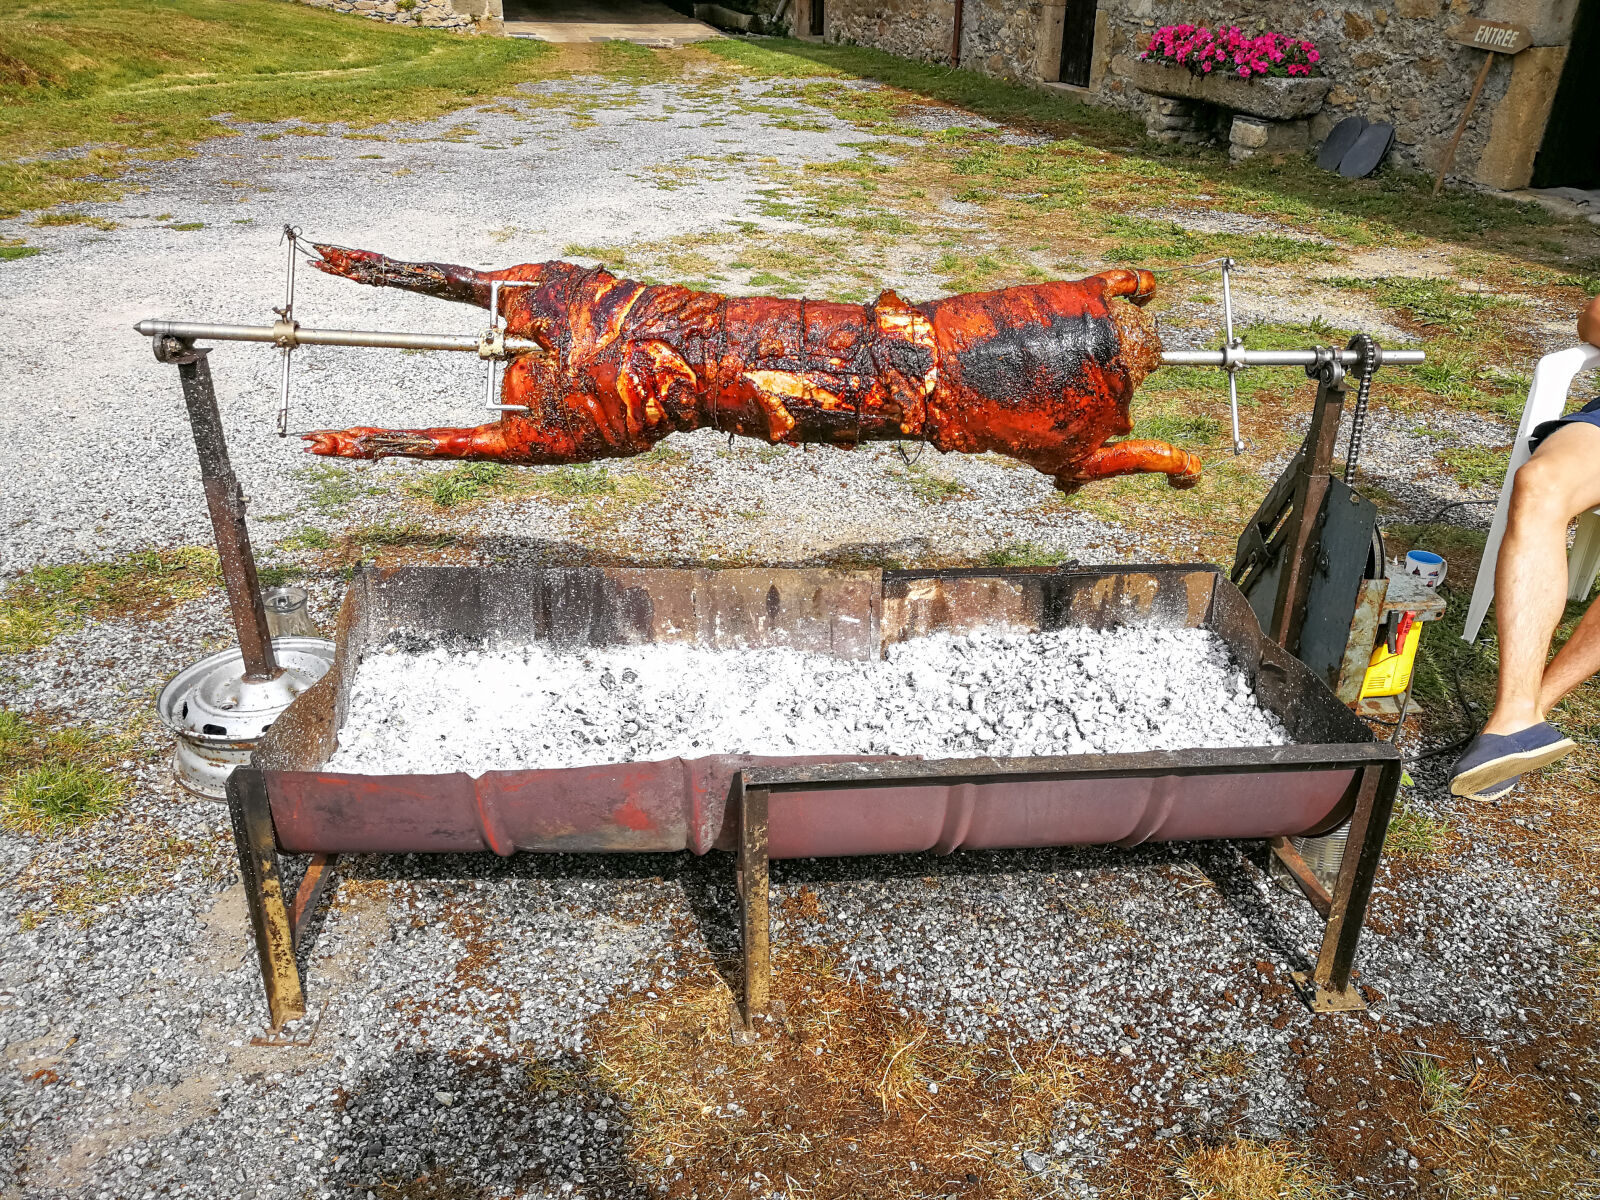 HUAWEI P10 Plus sample photo. Pig, barbecue, roasting photography